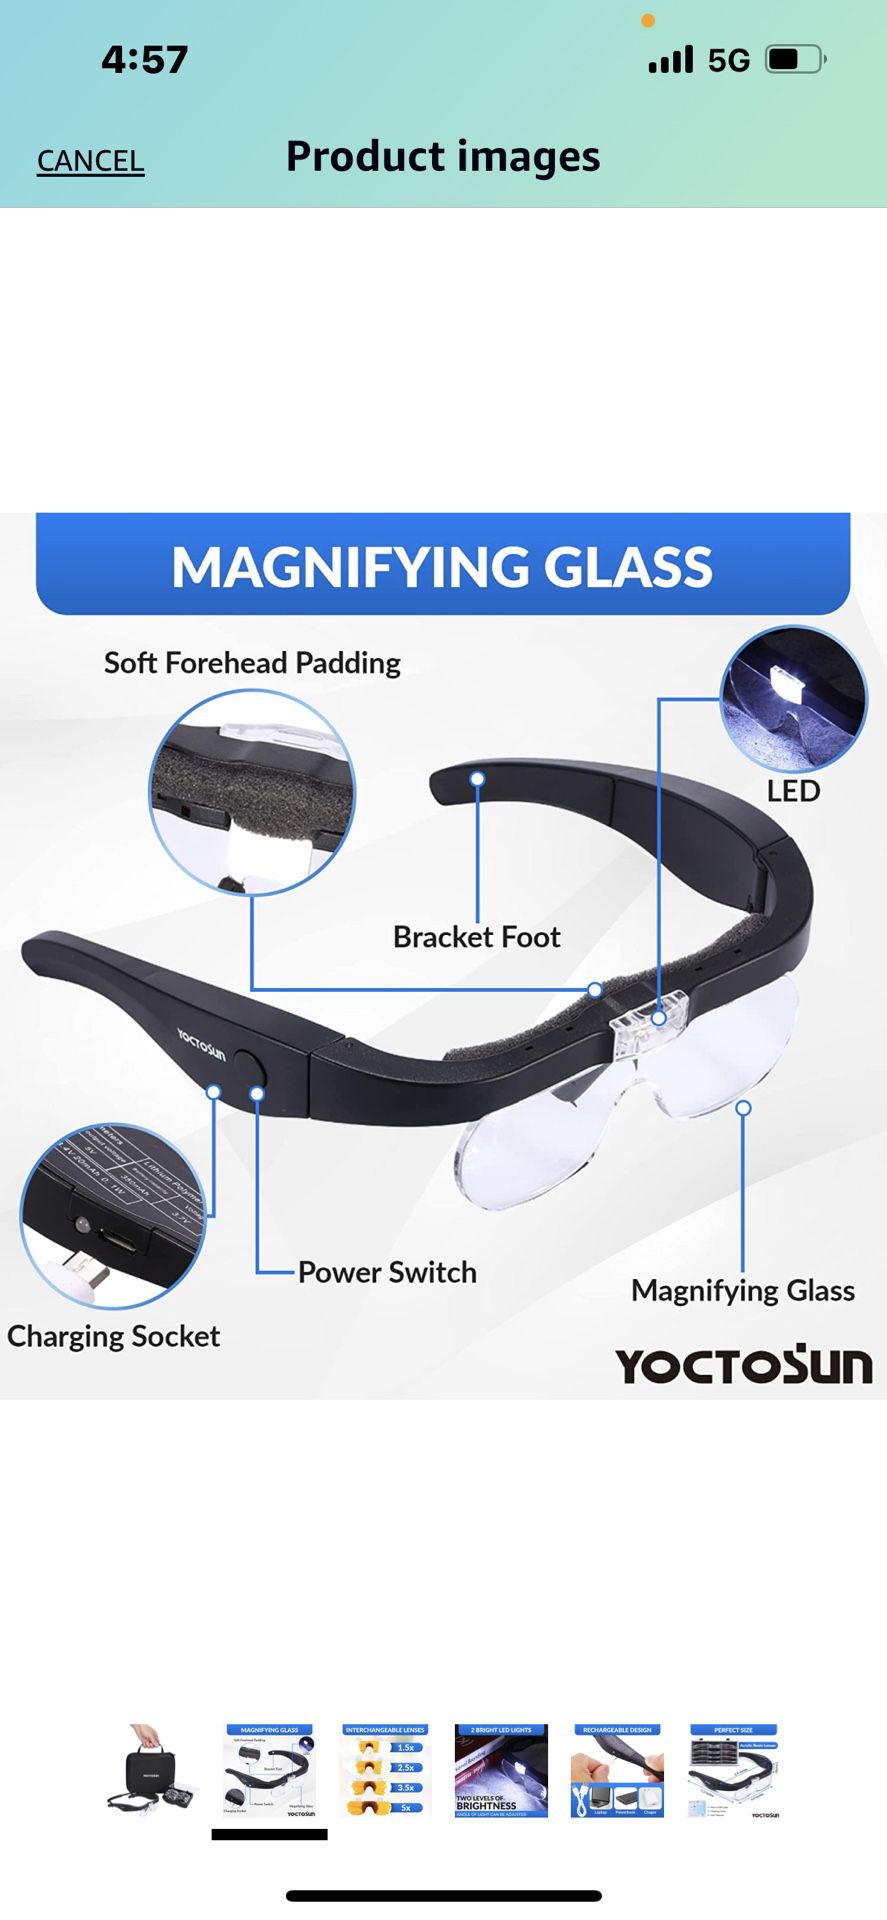 Magnifying Glasses With 2 Led Lights4 Detachable Lenses Storage Case Head Strap 